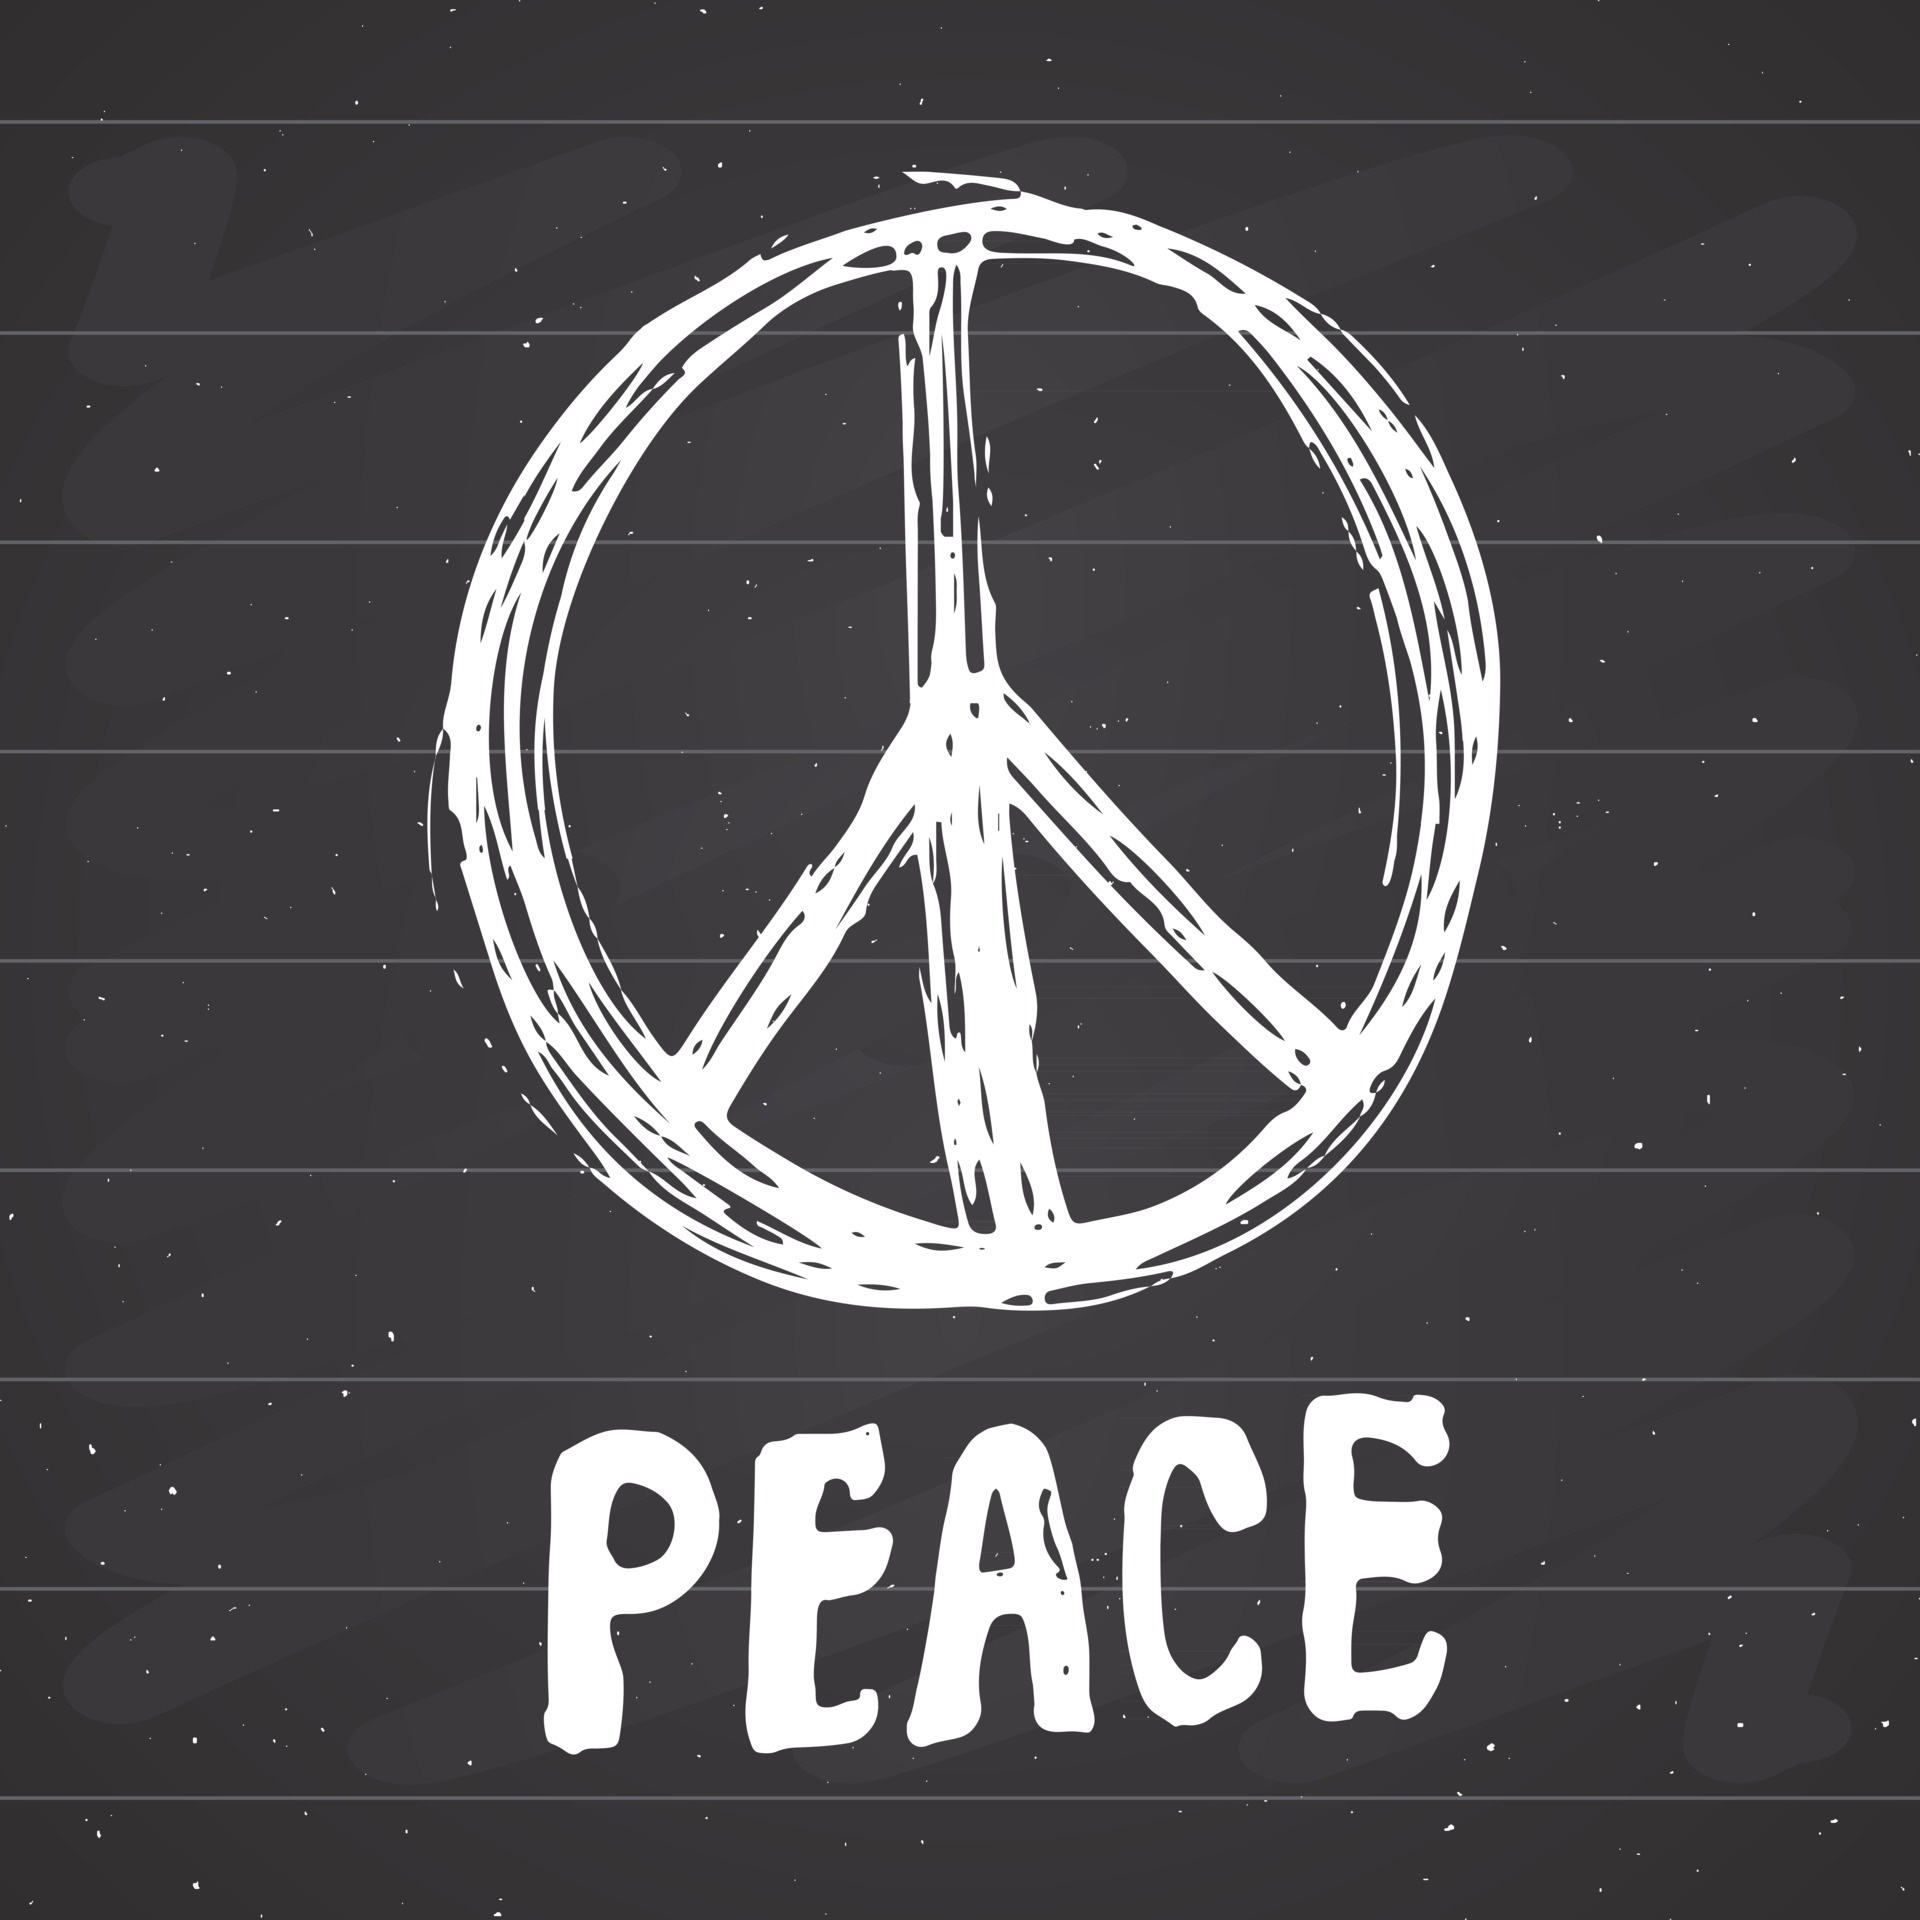 HD wallpaper, 1920X1920 Hd Phone, Pacifist Symbol, Peaceful Expression, Samsung Hd Pacifist Background Image, Hand Drawn Grunge, Hippie Sign